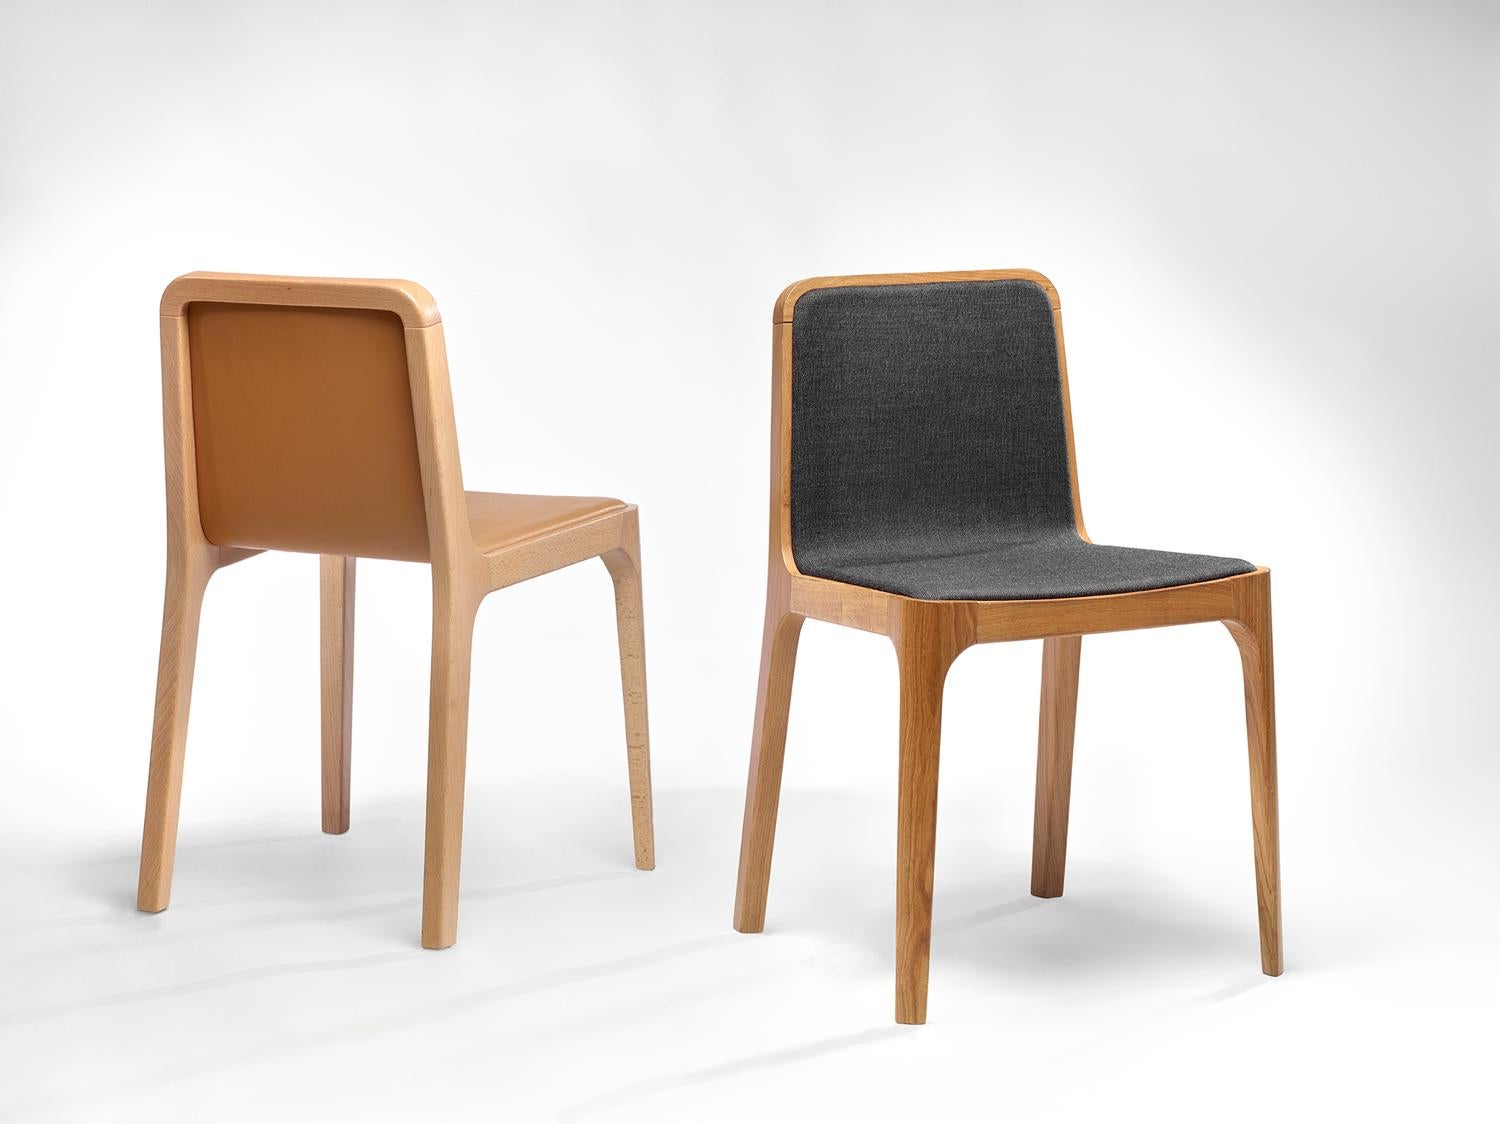 Hand-Crafted Minimalist Modern Chair in Beech Wood Fabric Upholstery For Sale